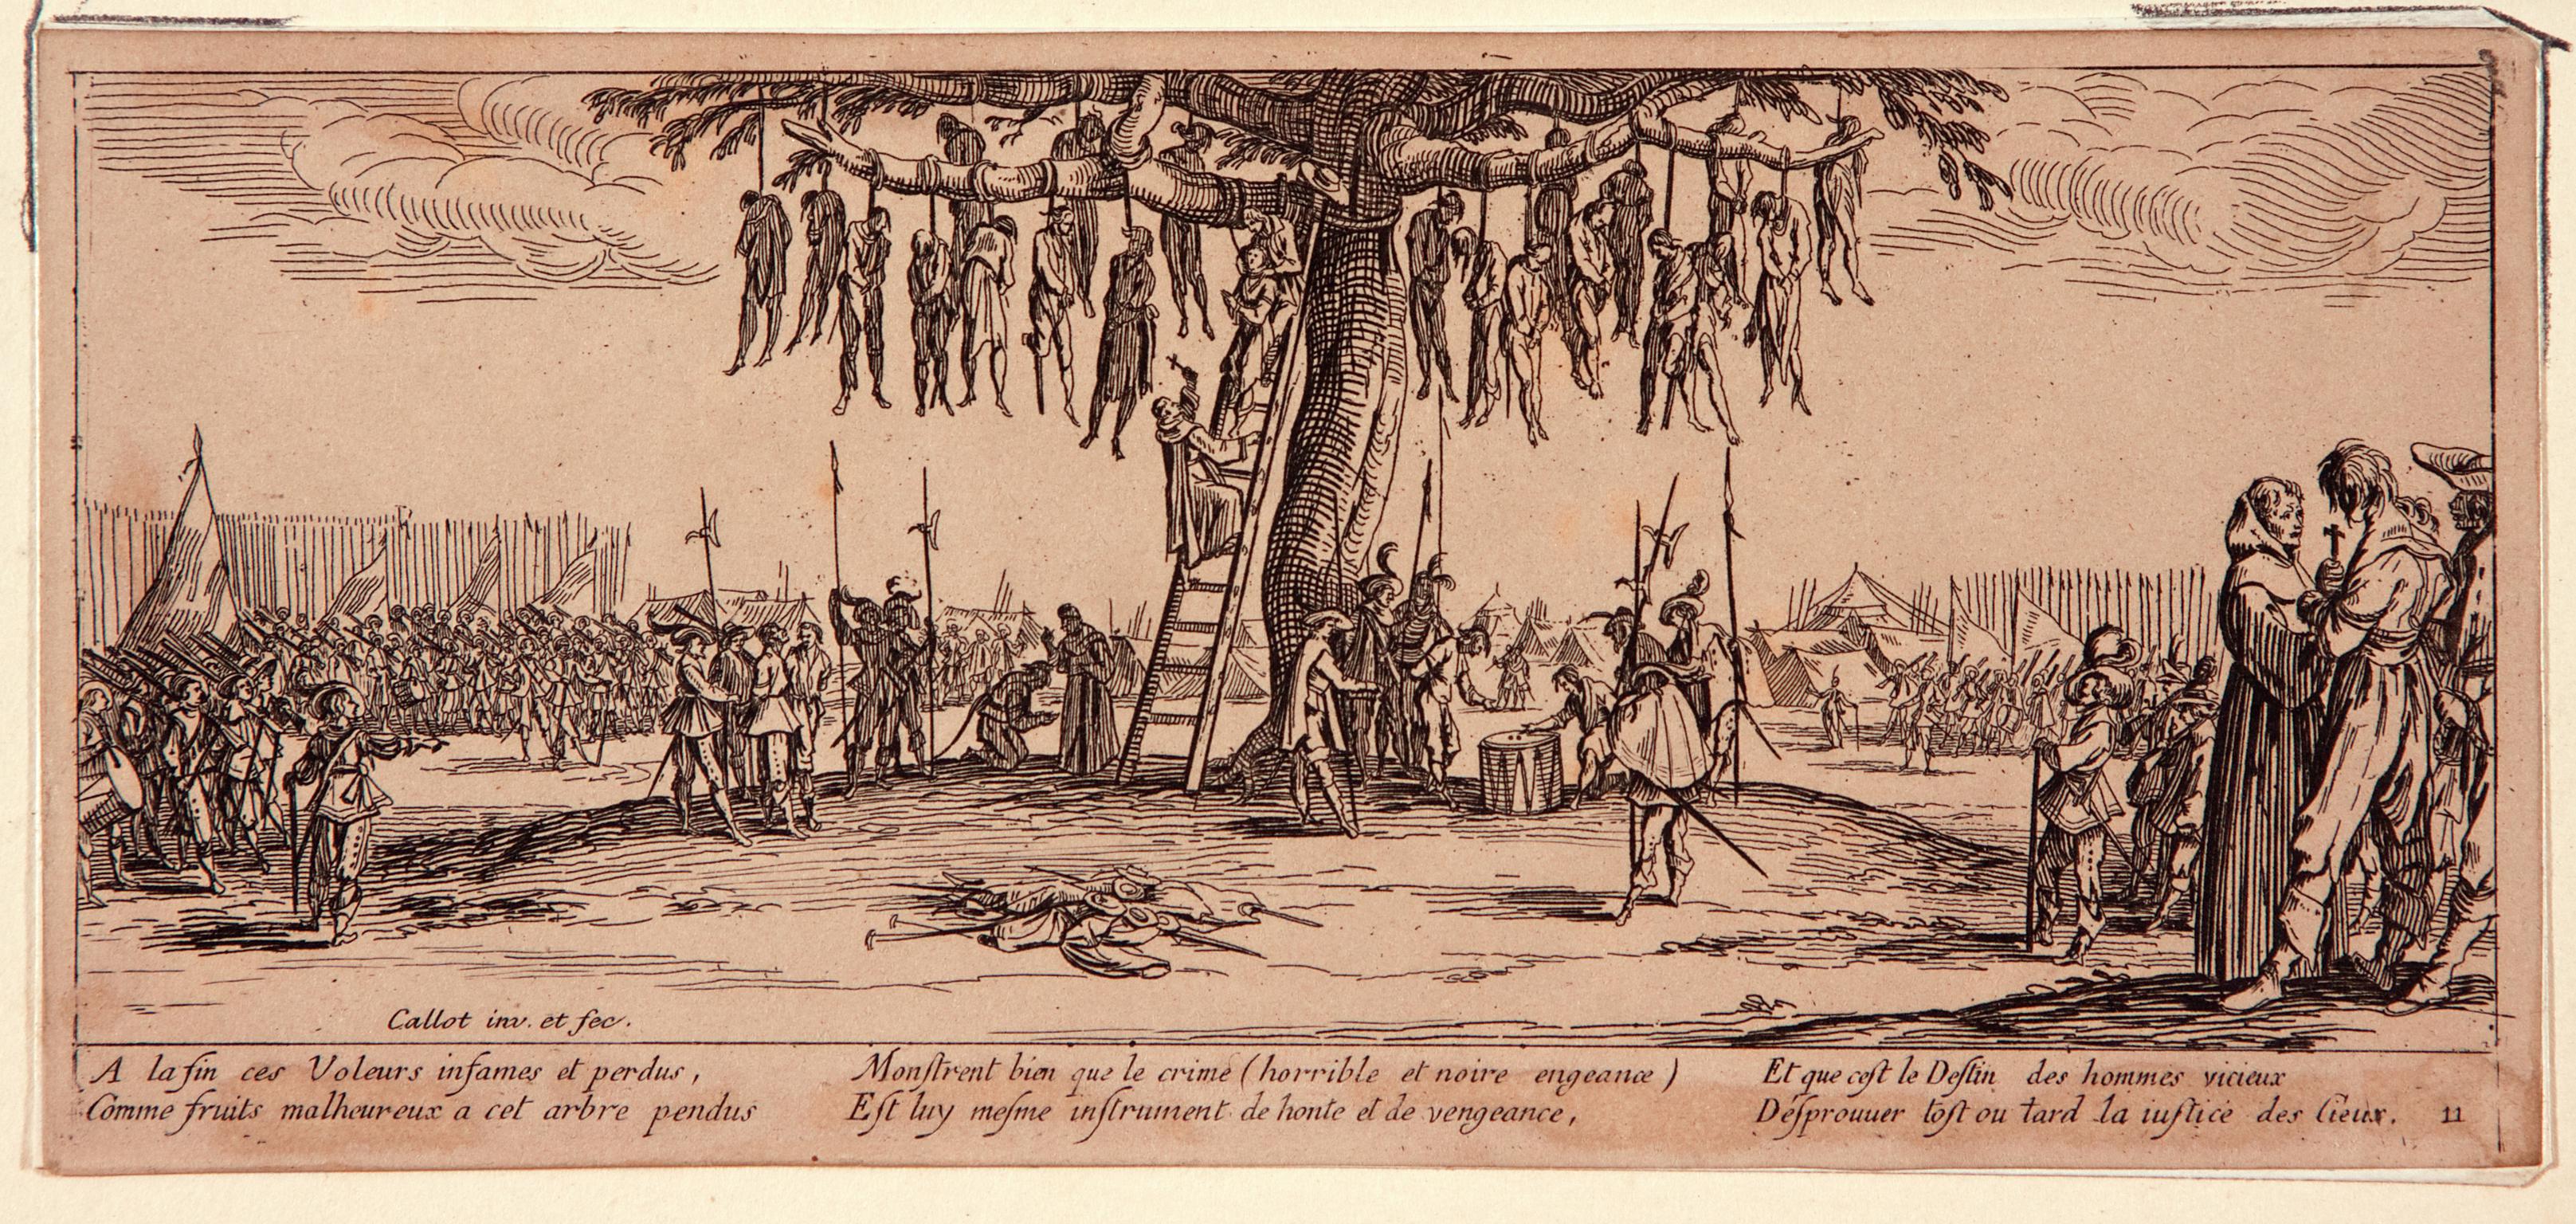 The pendaison with a score of bodies hanging from an oak